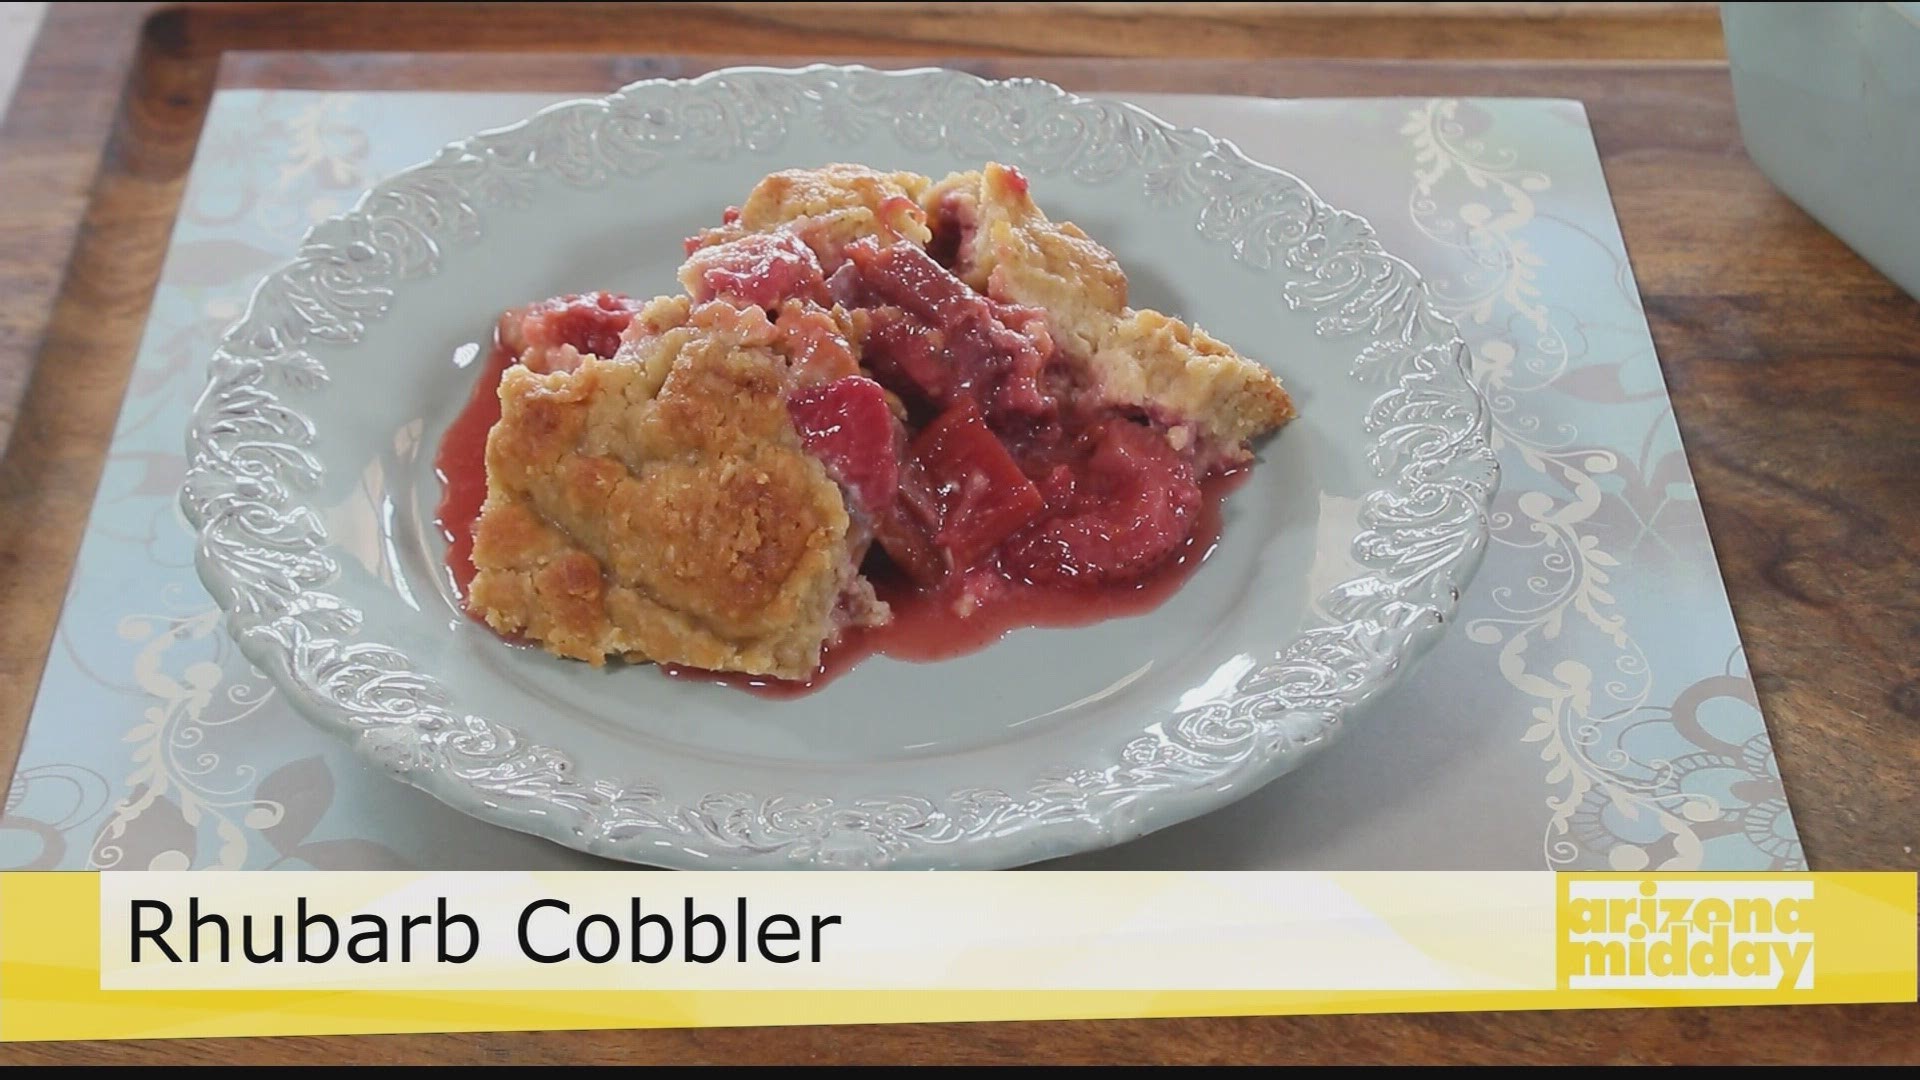 Jan D'Atri is in the kitchen showing us how to whip up the perfect Summer pie!